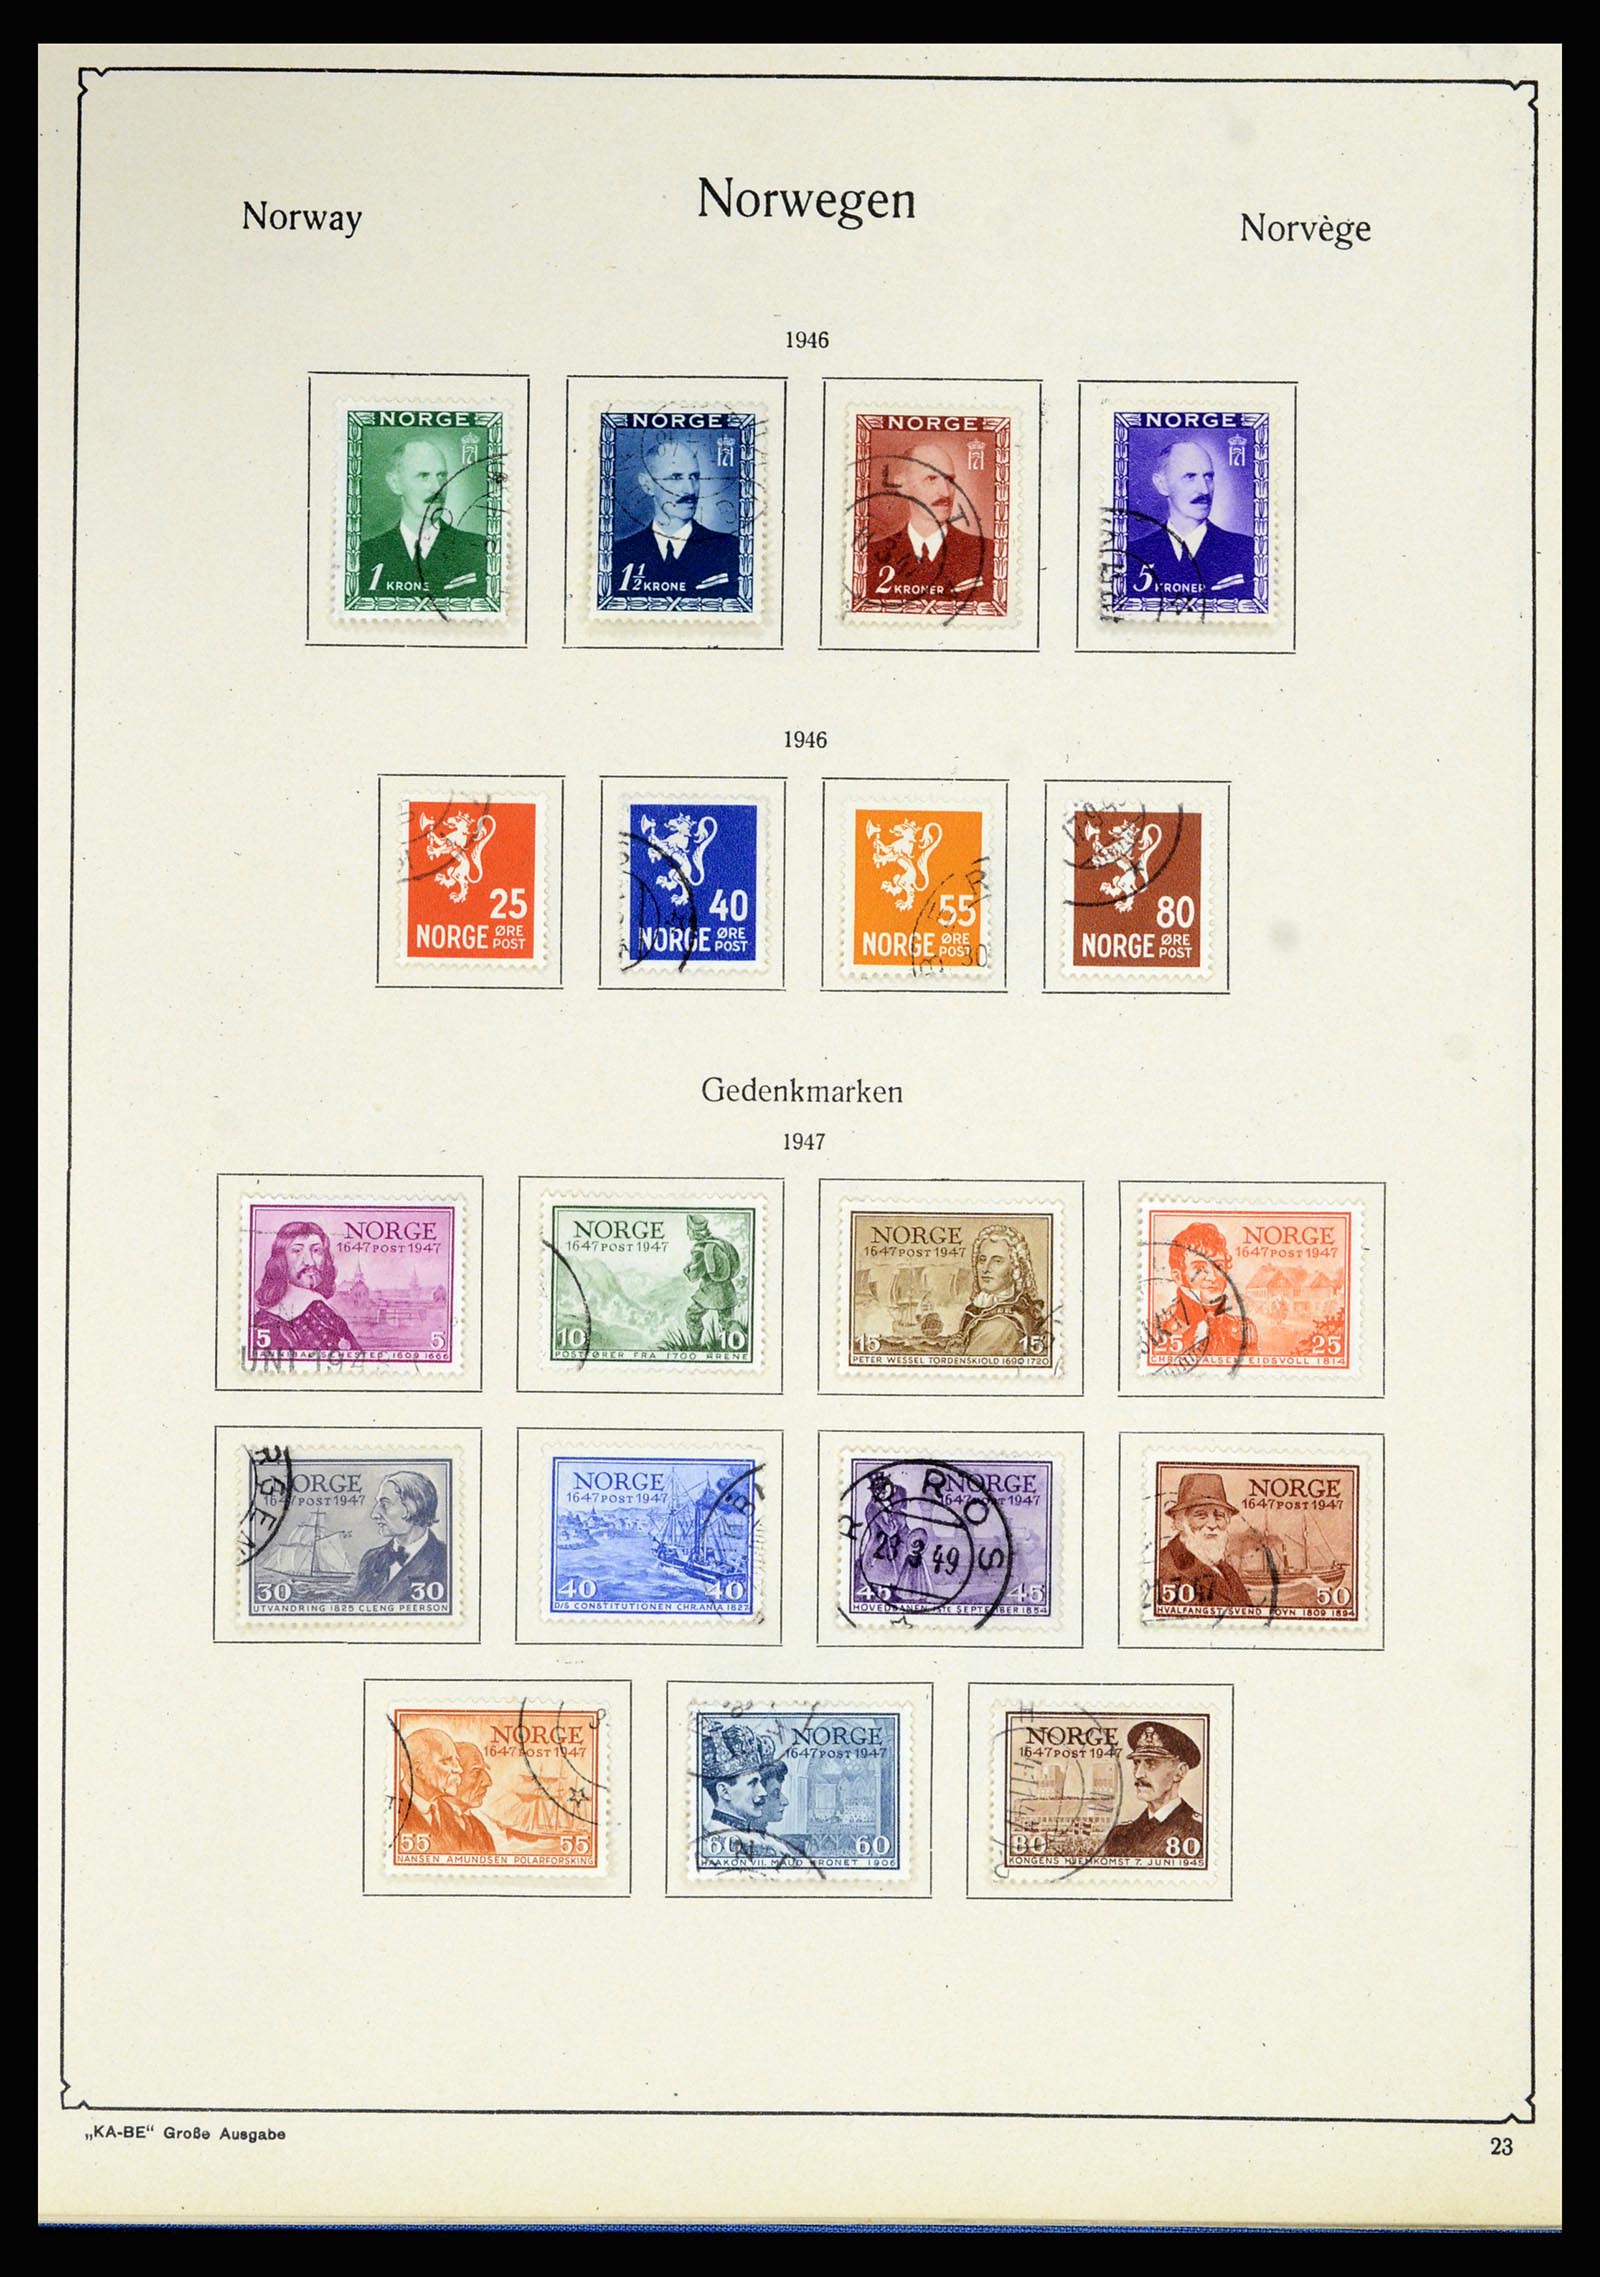 36903 023 - Stamp collection 36903 Norway 1856-1970.